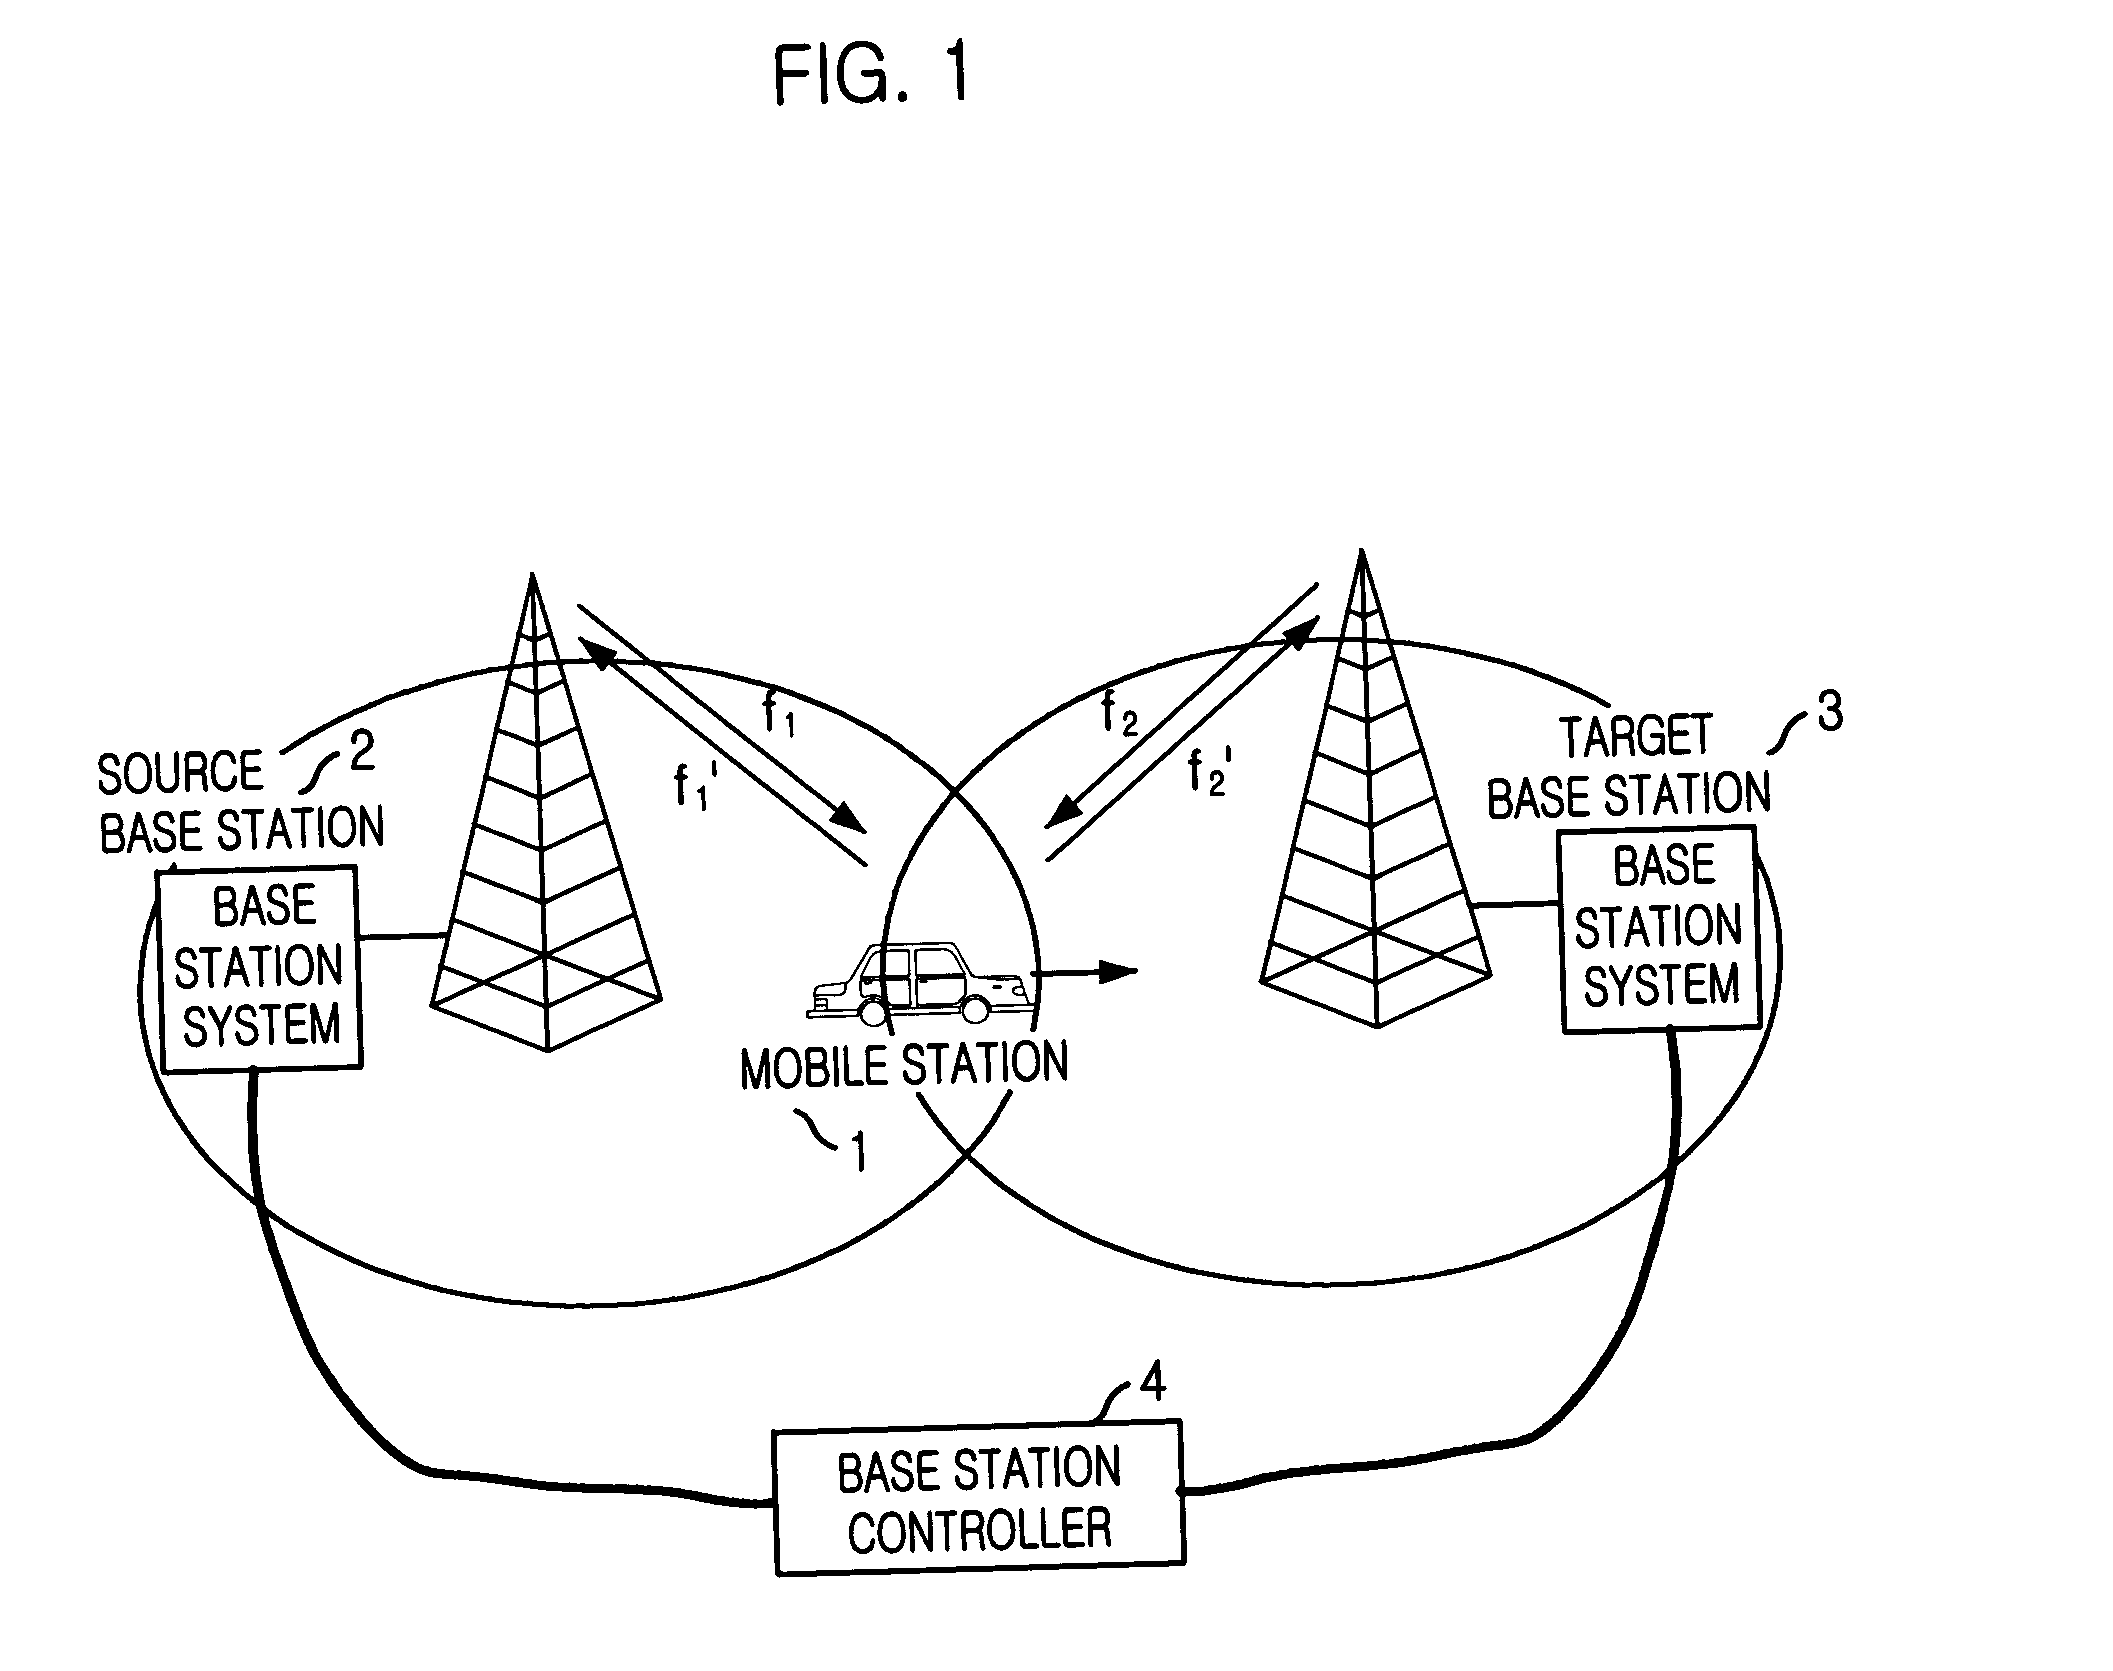 Method for seamless inter-frequency hard handover in radio communication system